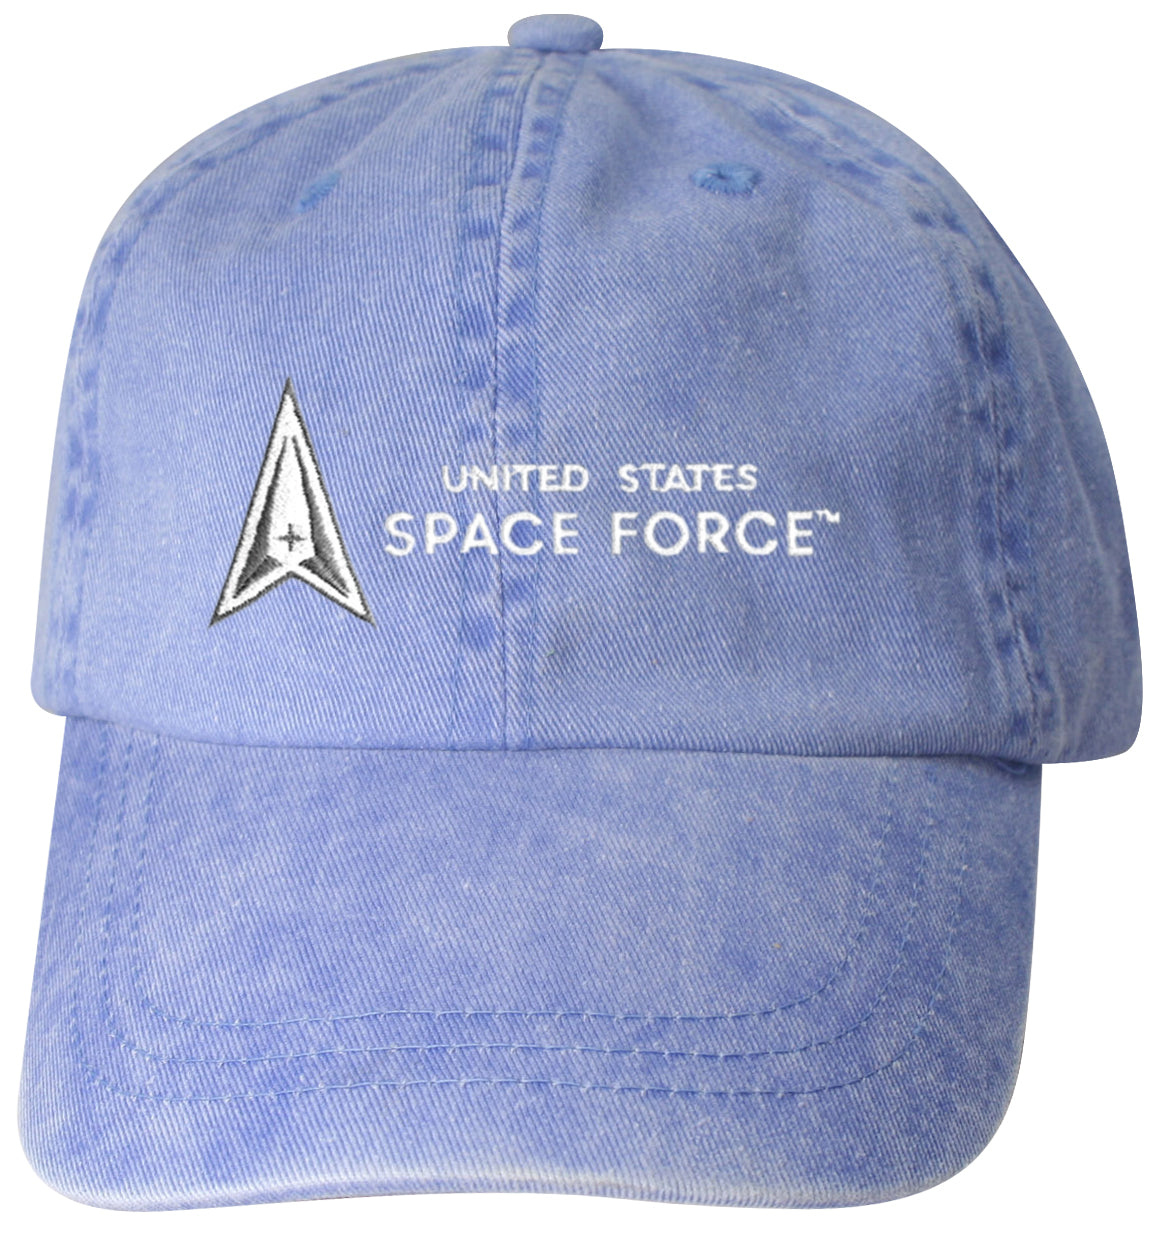 US Space Force Youth Ball Cap